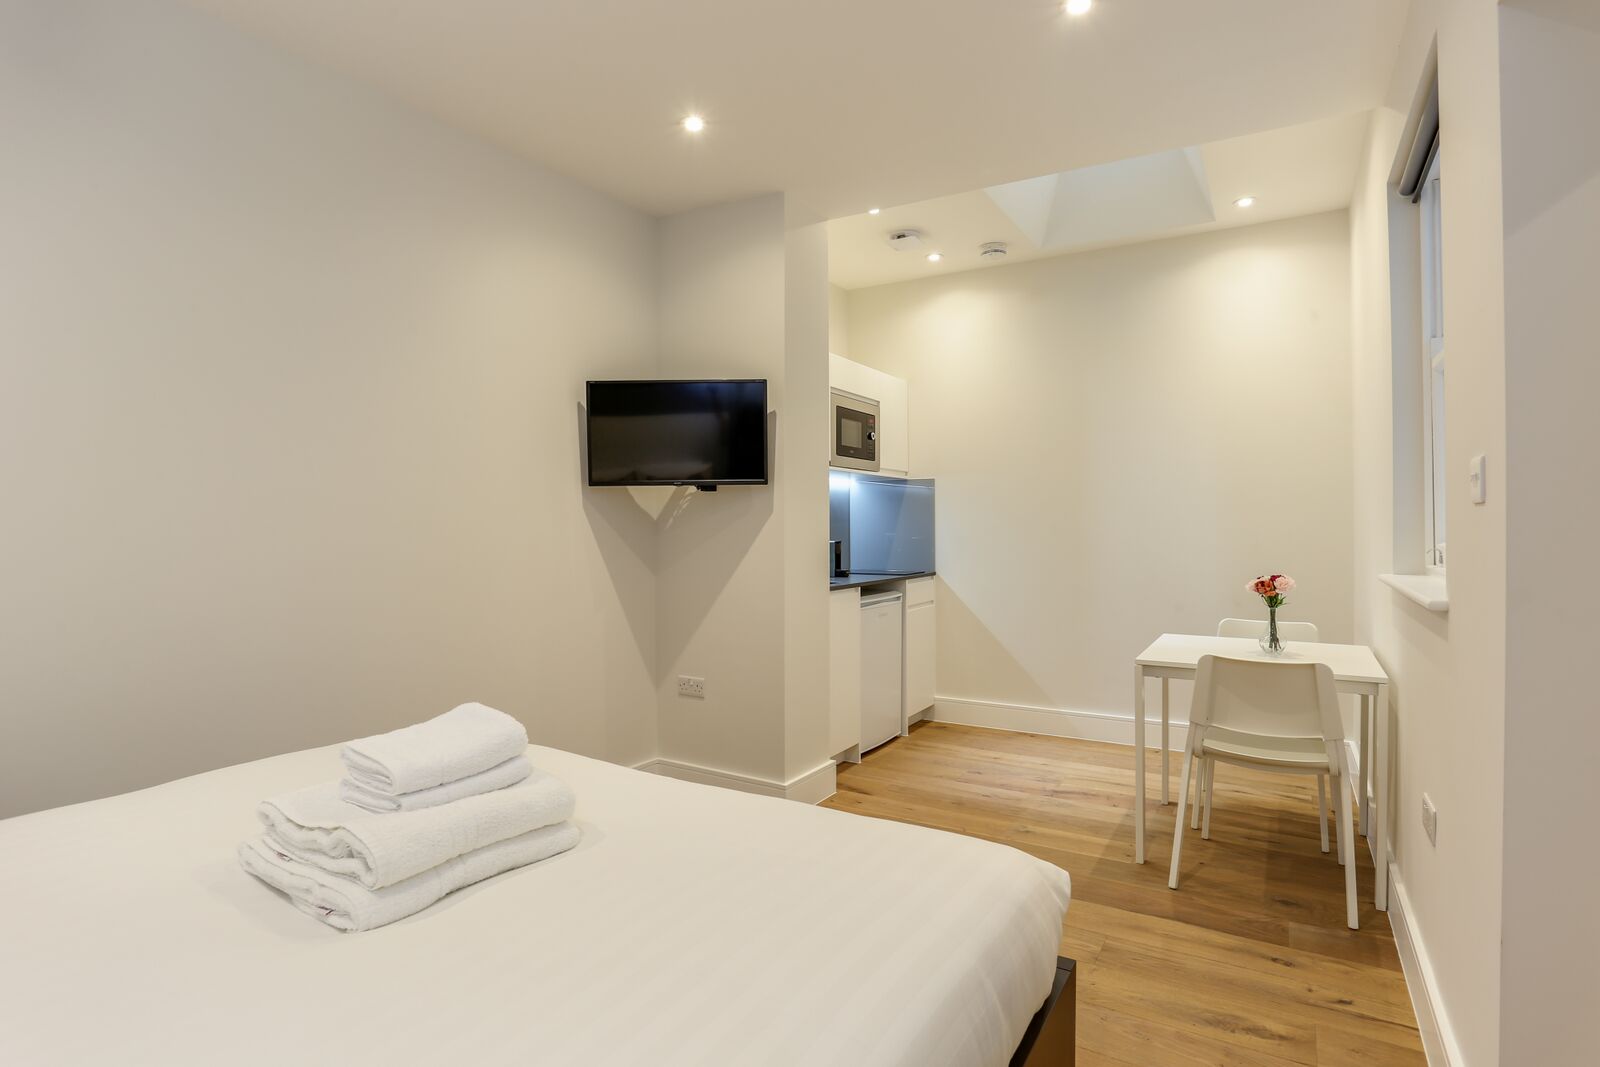 Serviced-Apartments-Queensborough-bordering-Hyde-Park-provides-contemporary-formed-studios--Fully-Furnished,-Wi-Fi,-Extra-Amenities-and-Luggage-Storage!